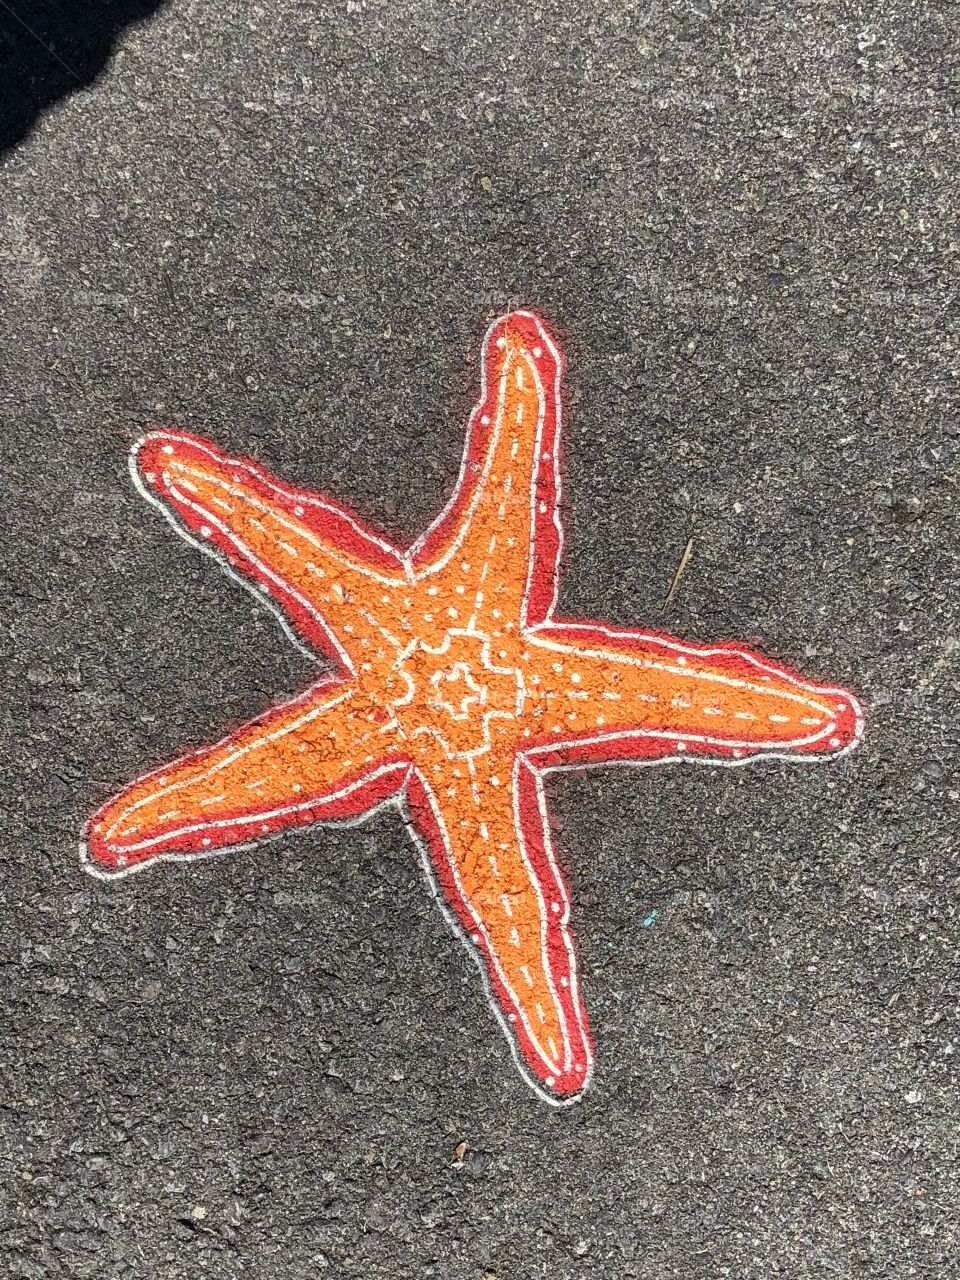 Painted on the ground on a walking path. 